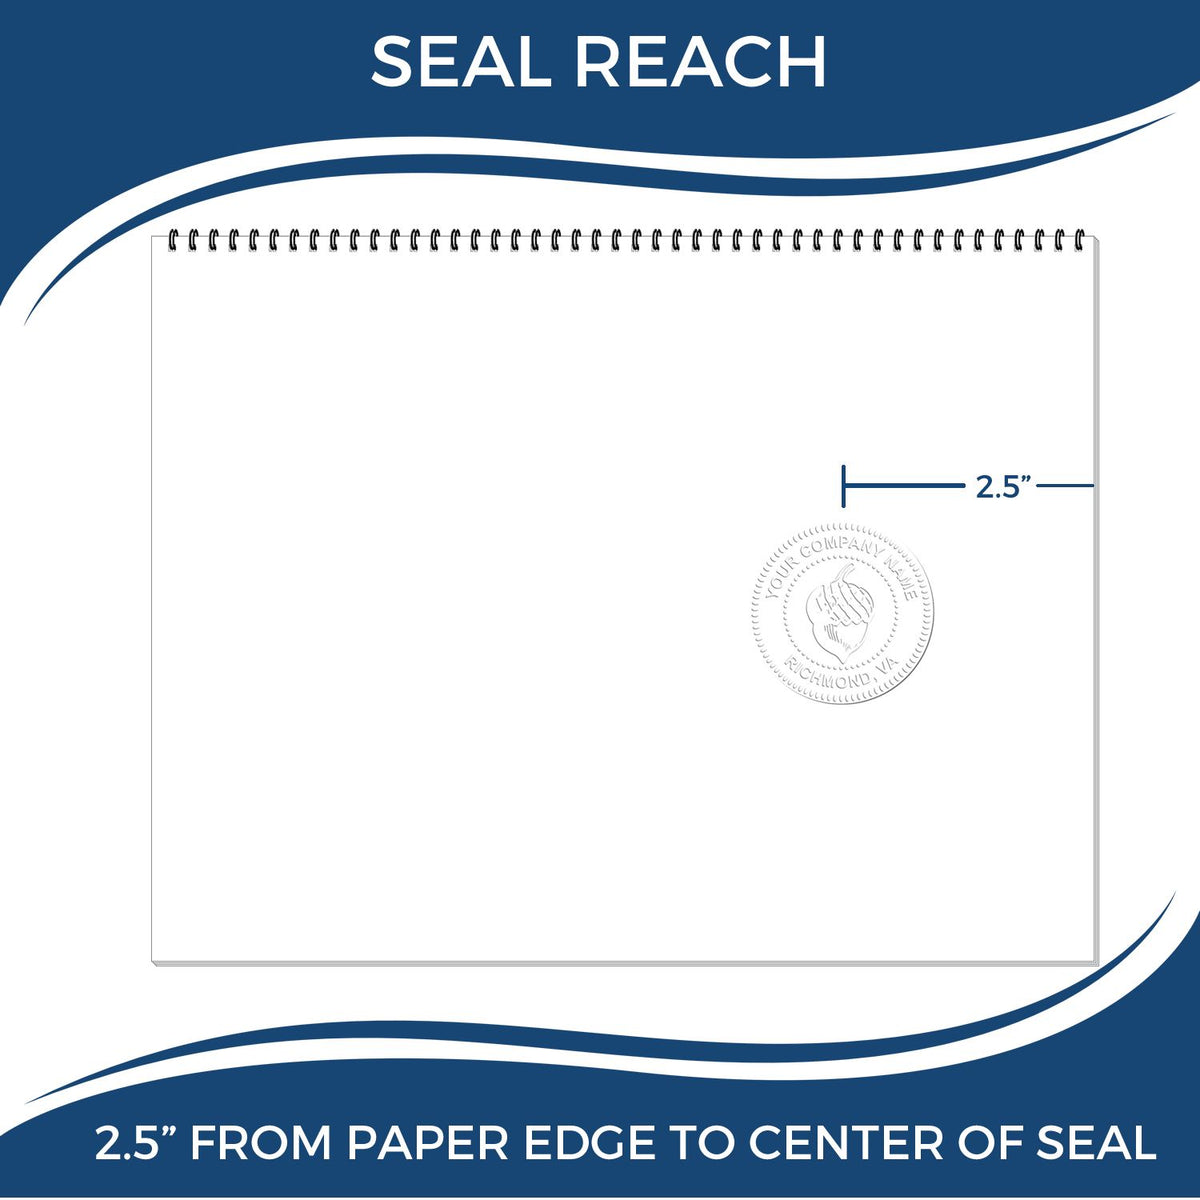 An infographic showing the seal reach which is represented by a ruler and a miniature seal image of the Long Reach Wyoming Geology Seal